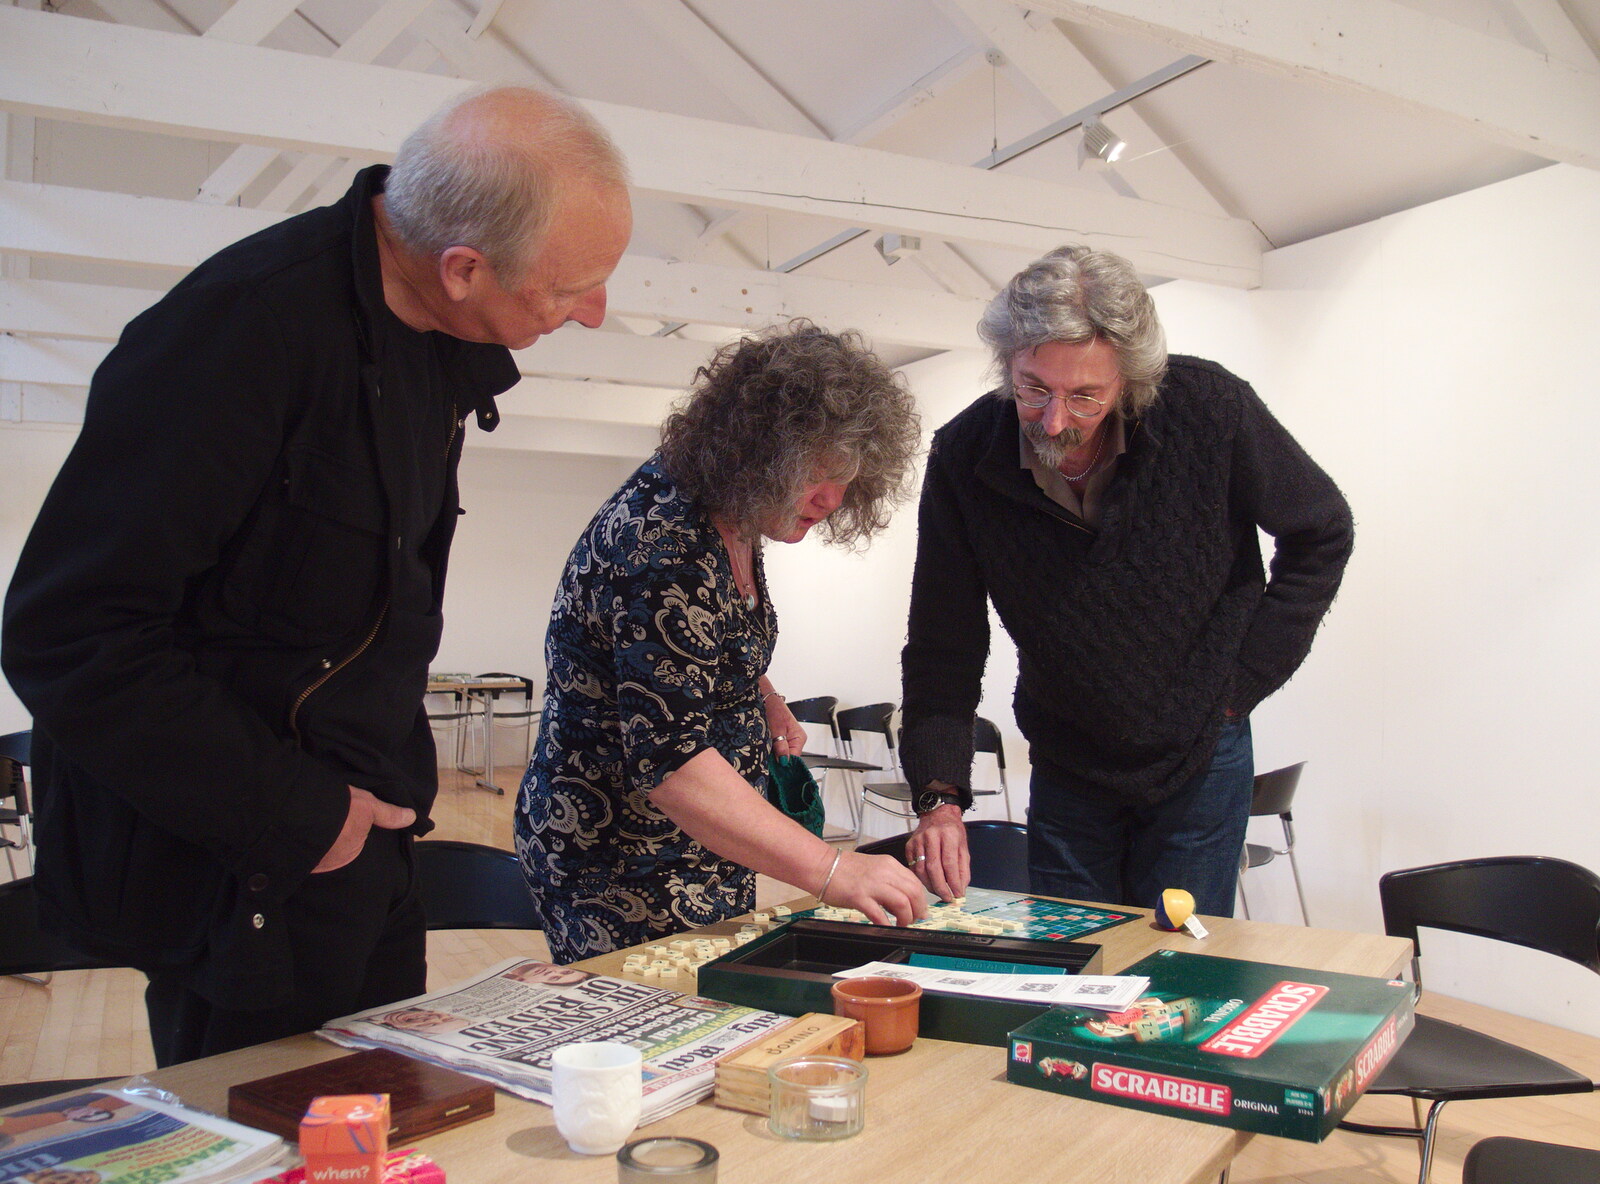 Jo makes another word from The BBs Play Scrabble at Wingfield Barns, Wingfield, Suffolk - 24th May 2014